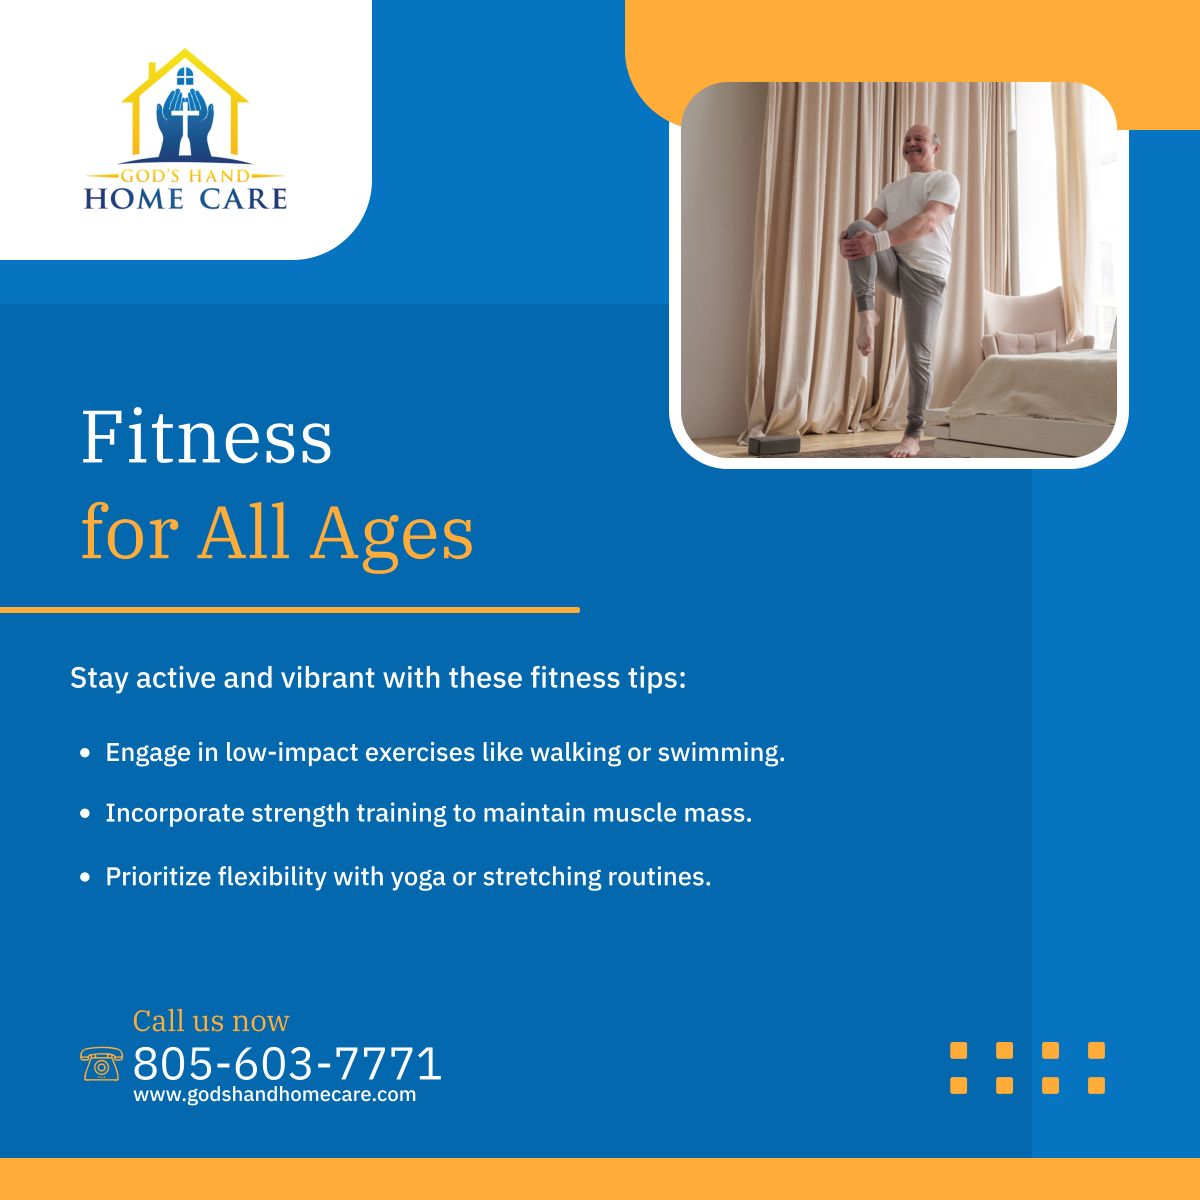 Fitness knows no age limit! Embrace movement, build strength, and enhance flexibility for a healthier, more vibrant life. 

#OxnardCA #HomeCare #HealthyLifestyle